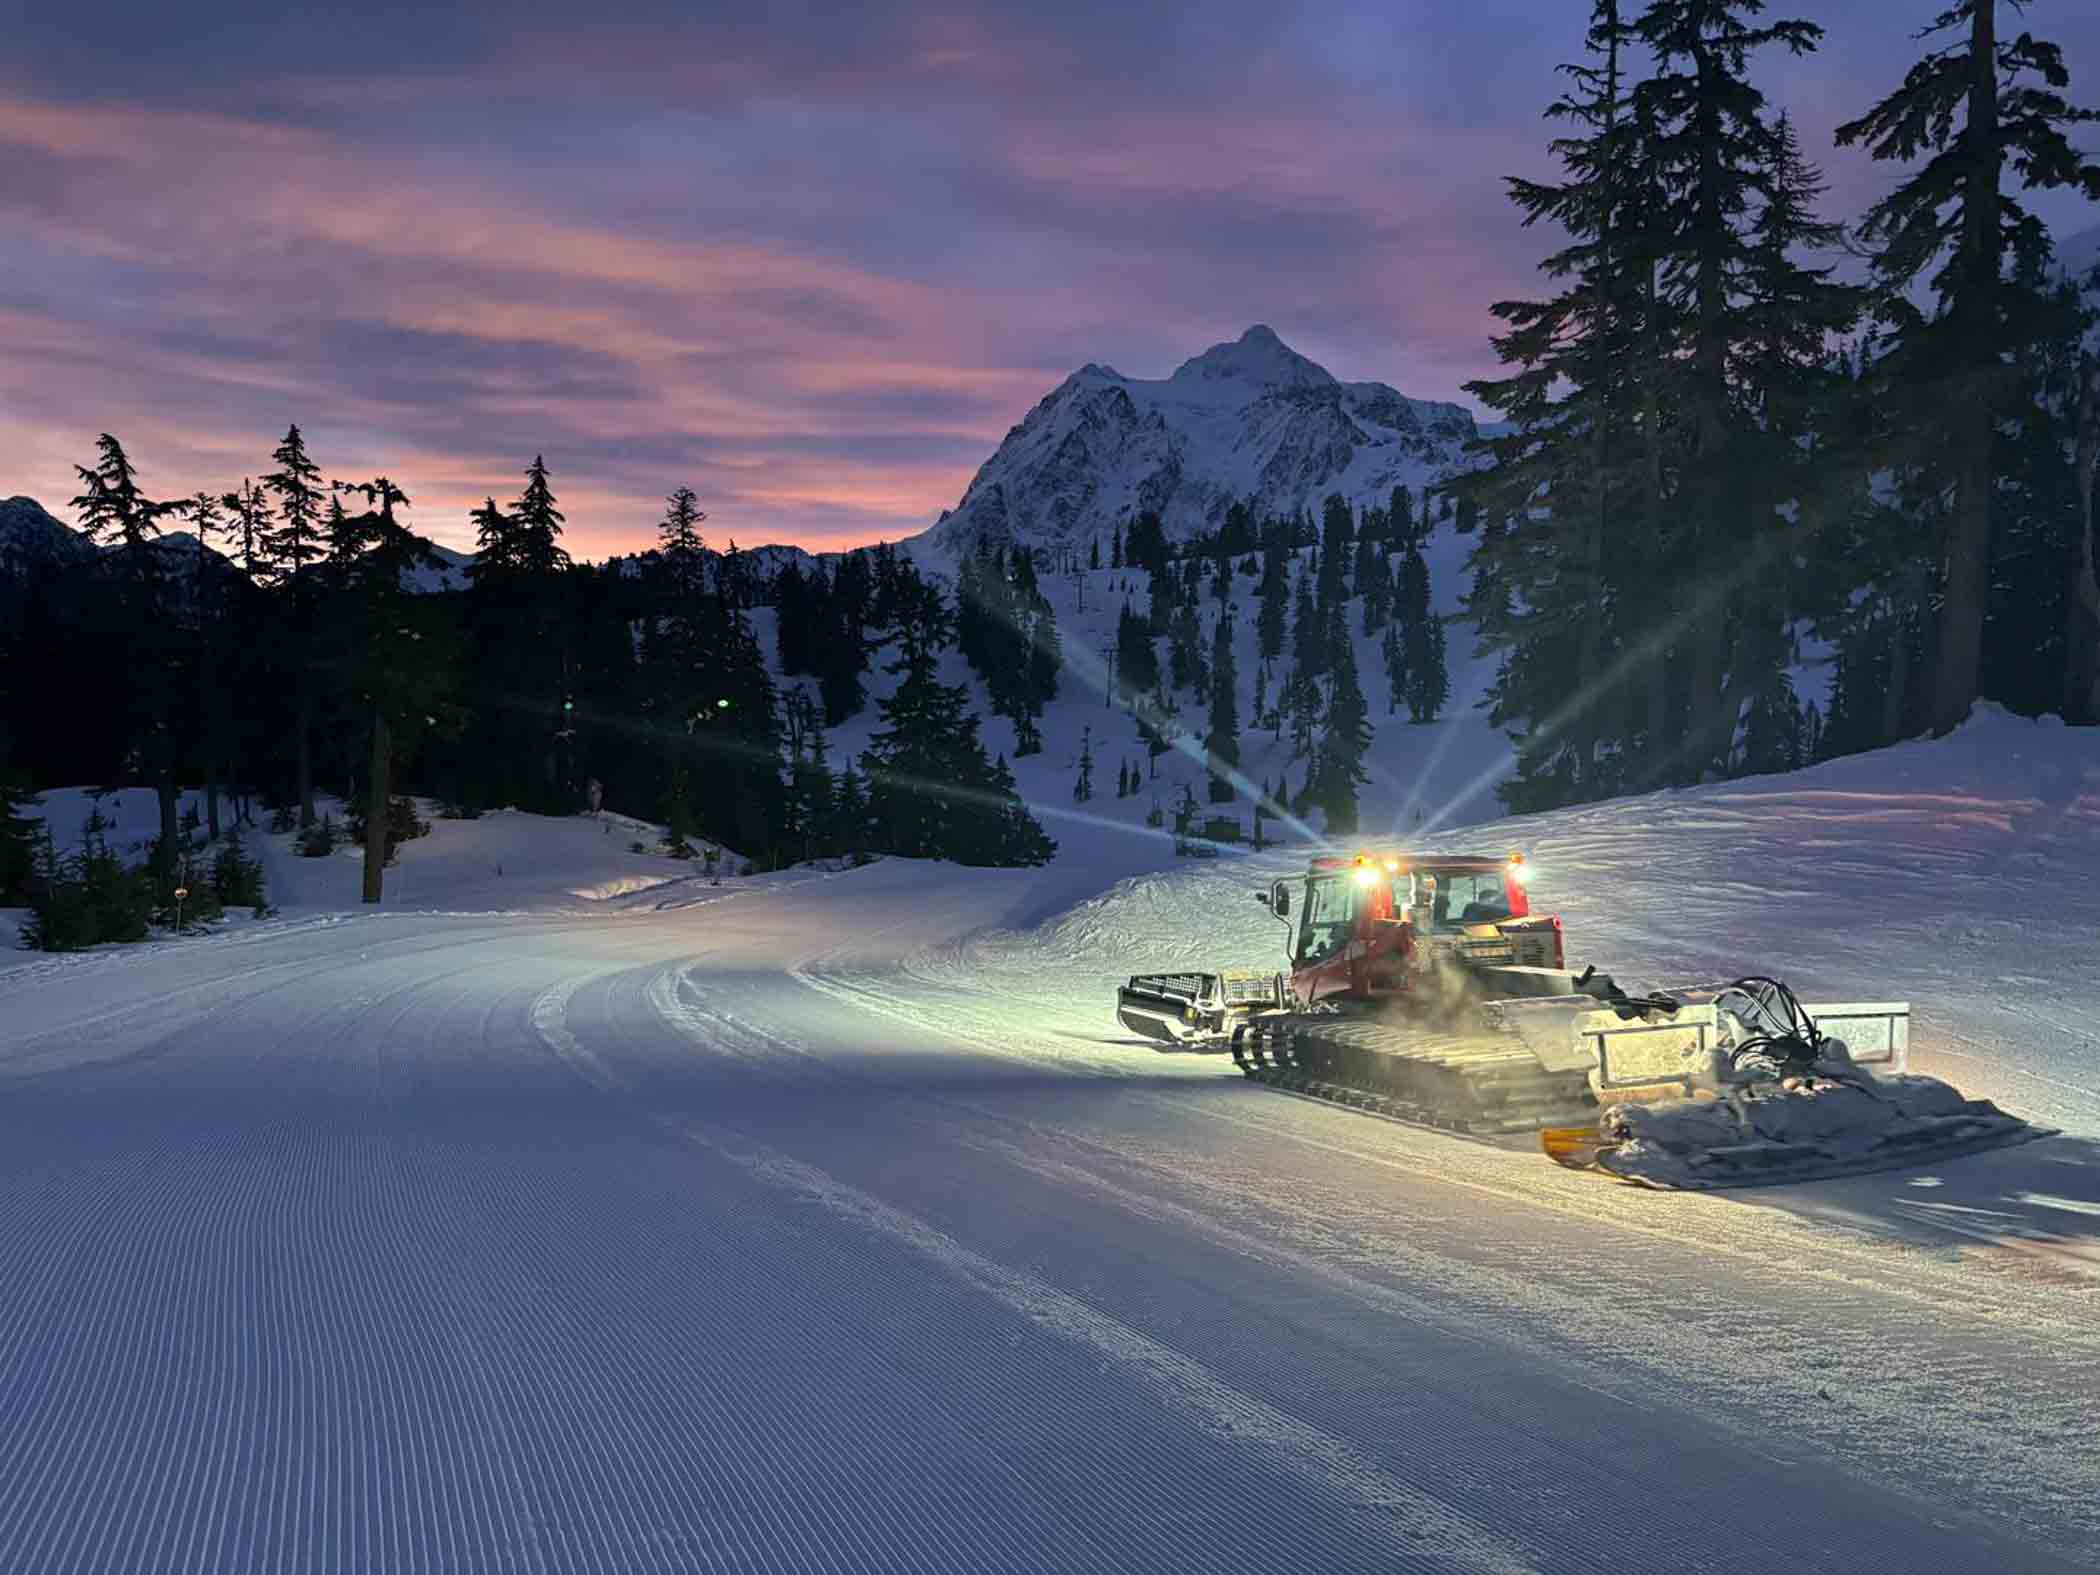 a snowcat sets out to work under a pink sky in the snowy mountains